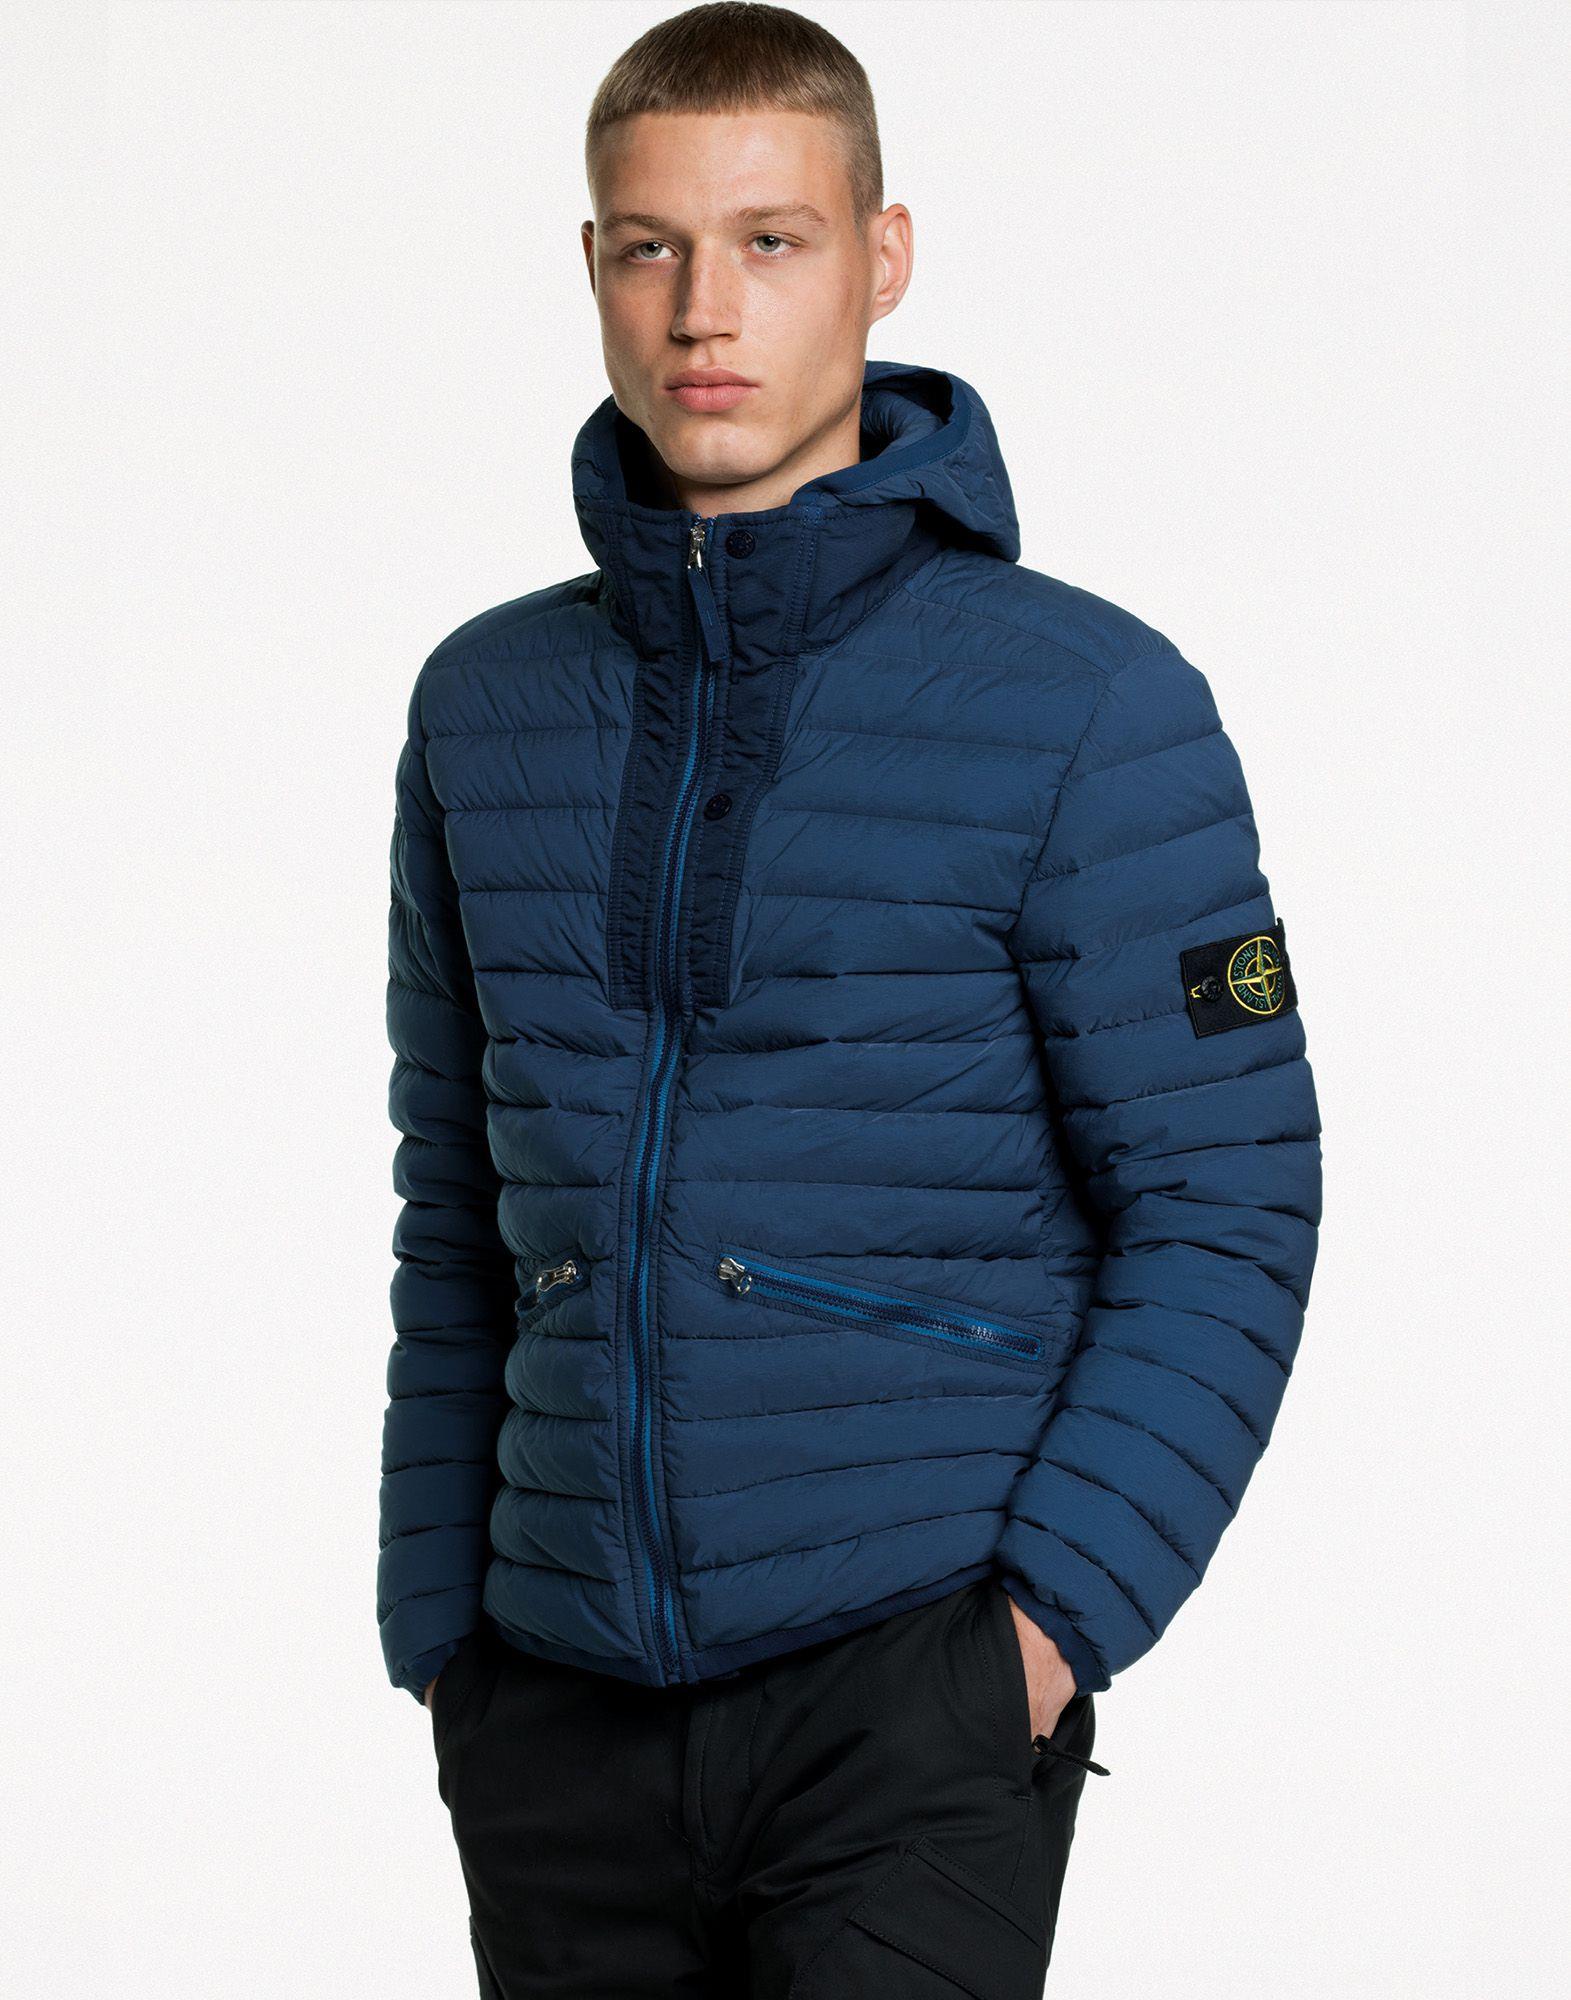 Stone Island Synthetic Loom Woven Nylon Down Jacket in Marine Blue (Blue)  for Men - Lyst